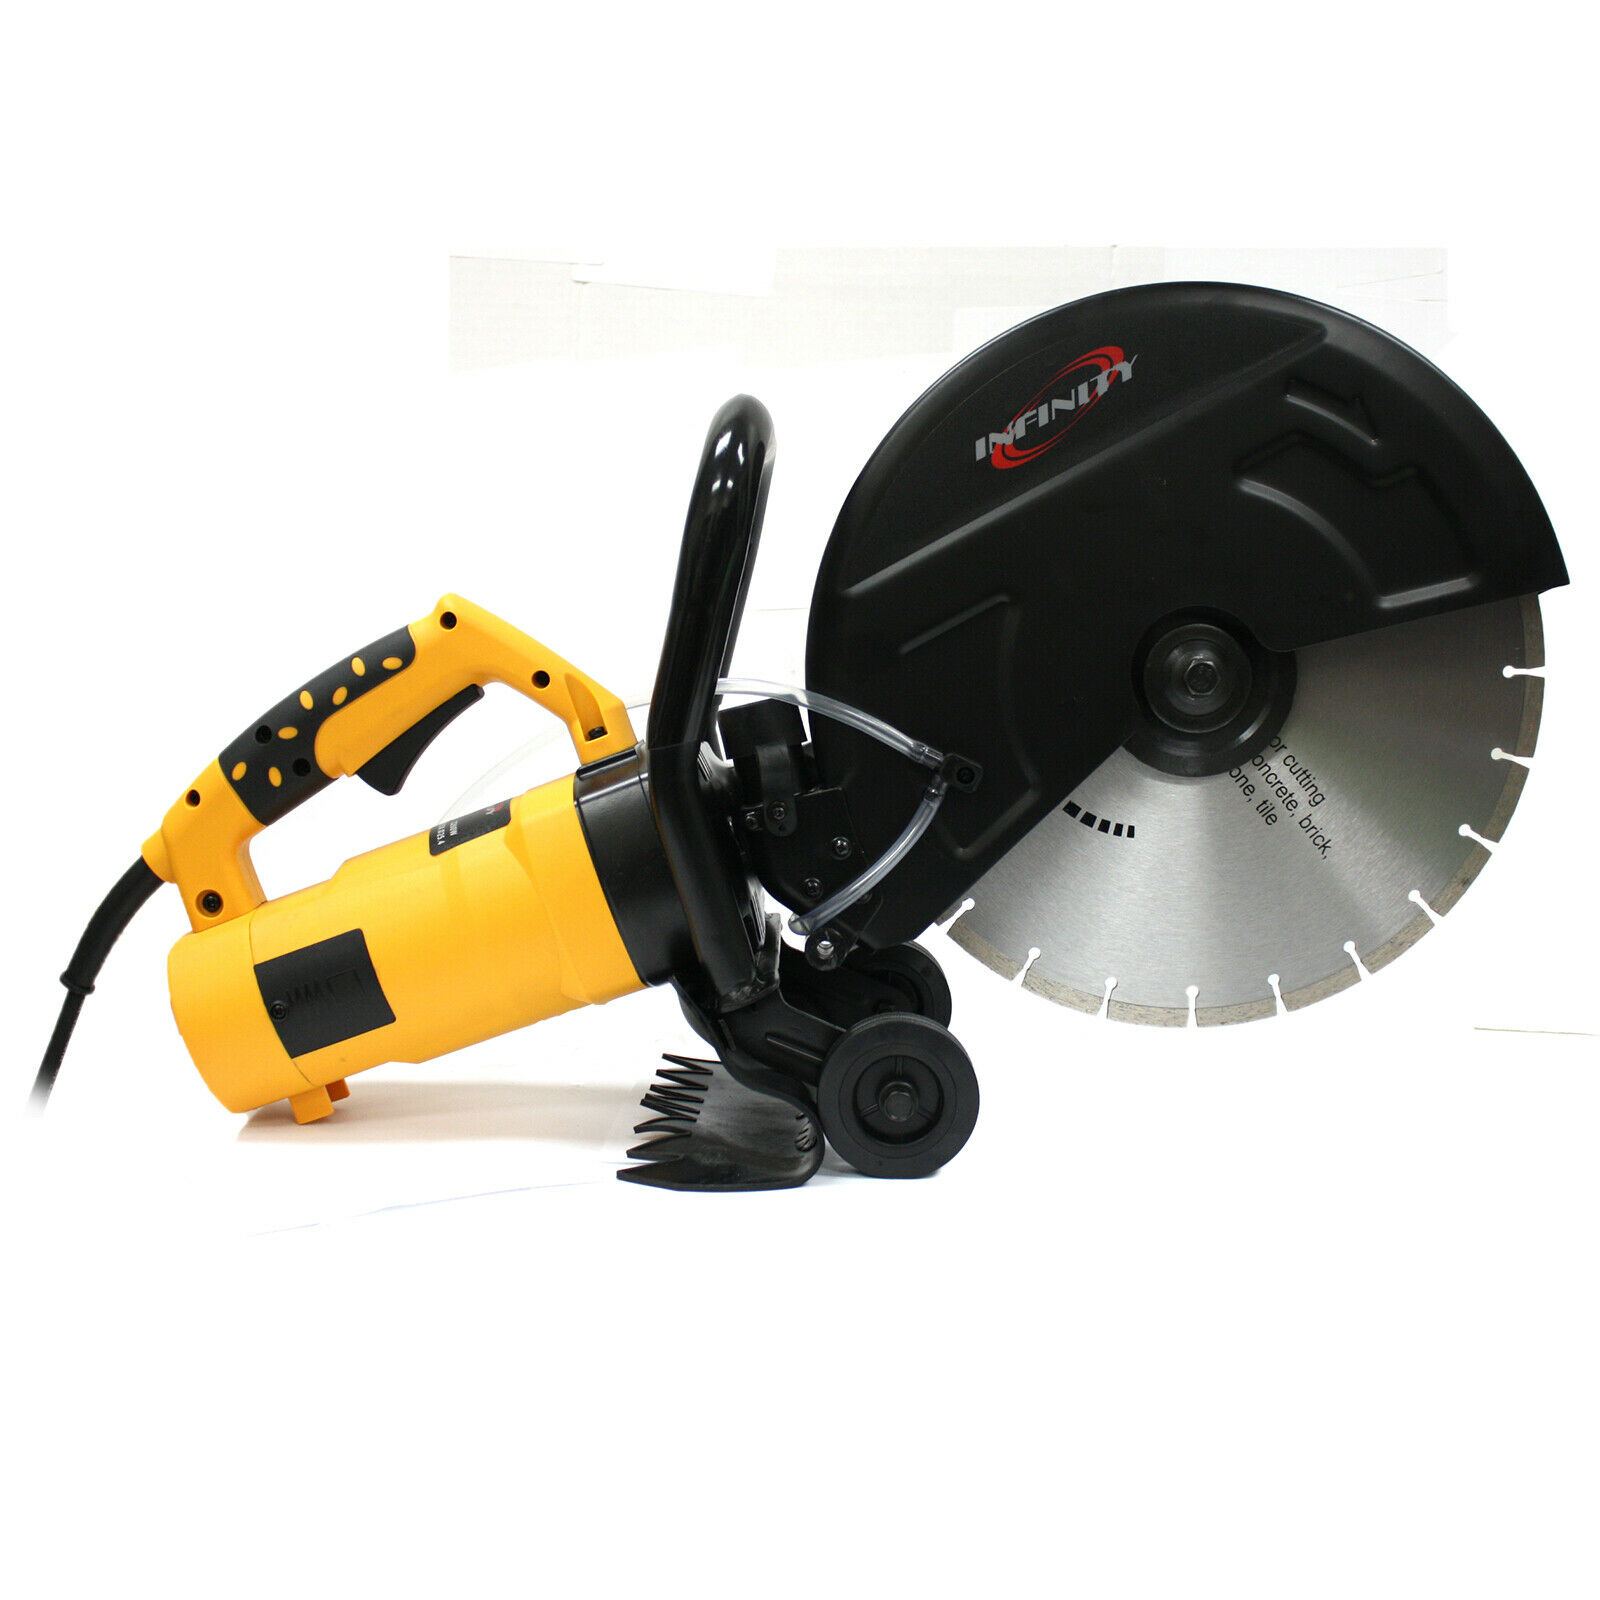 Iglobalbuy Portable 14" Concrete Saw 3200W Corded Electric Cutter 4100 RPM w Water Pump ＆ Blade - 3